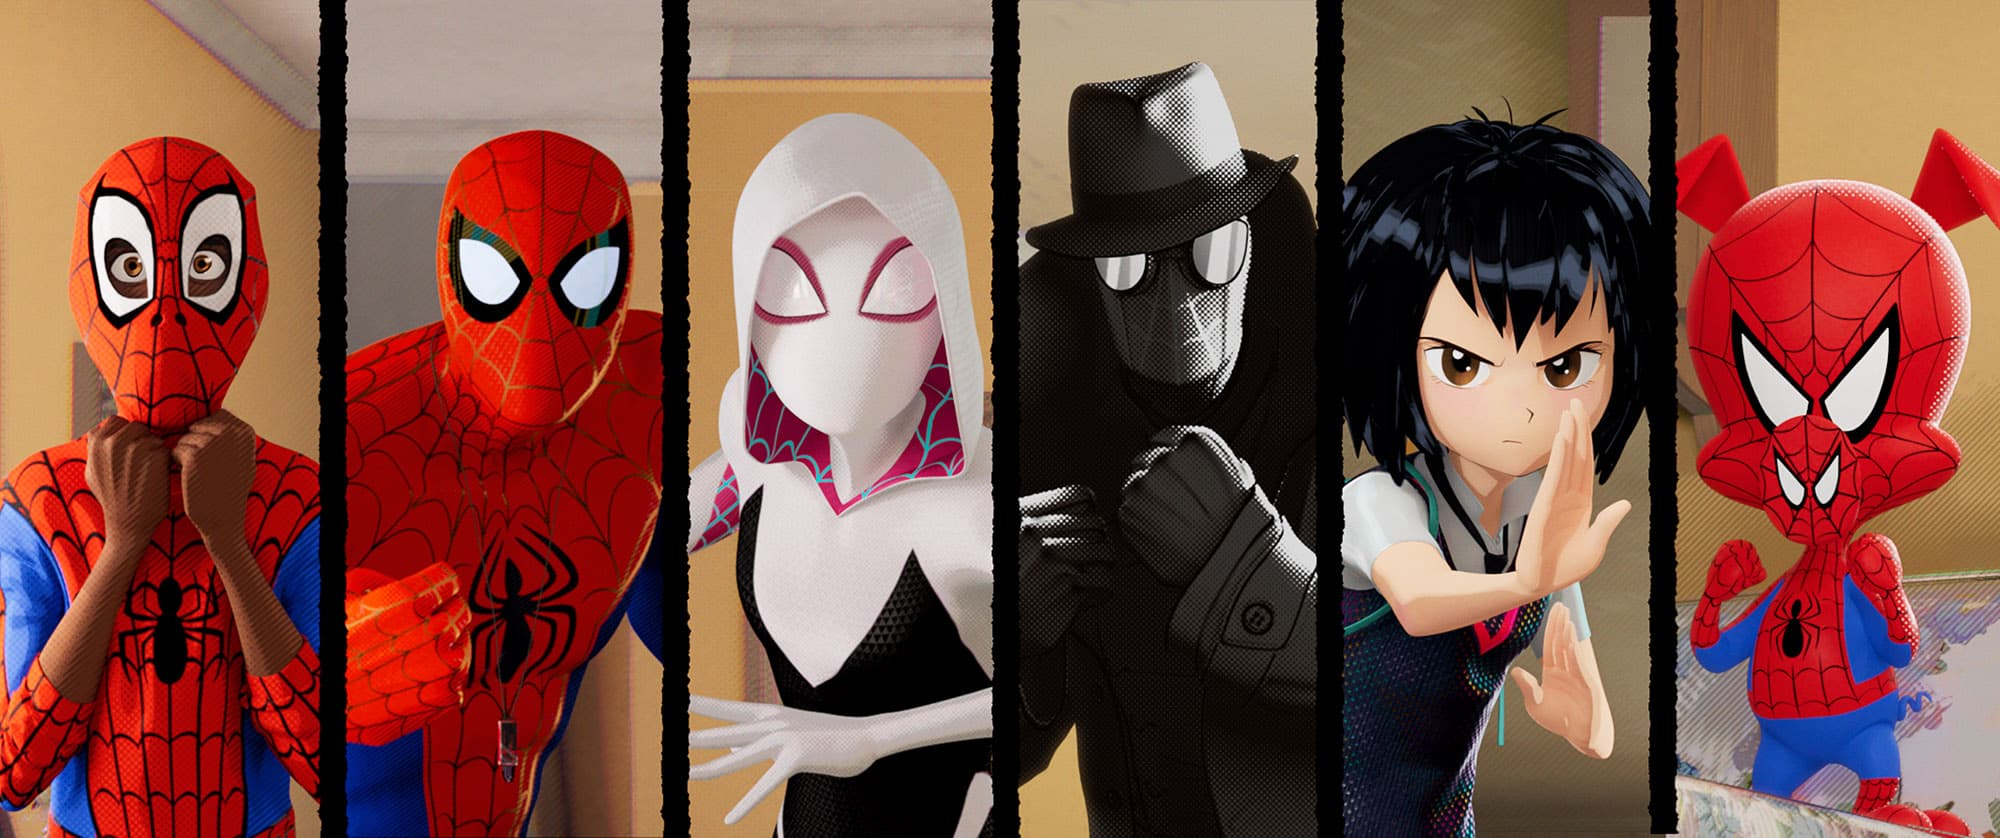 Spider-Man Into the Spider-Verse - A Multiverse Adventure of Epic Proportions (3)